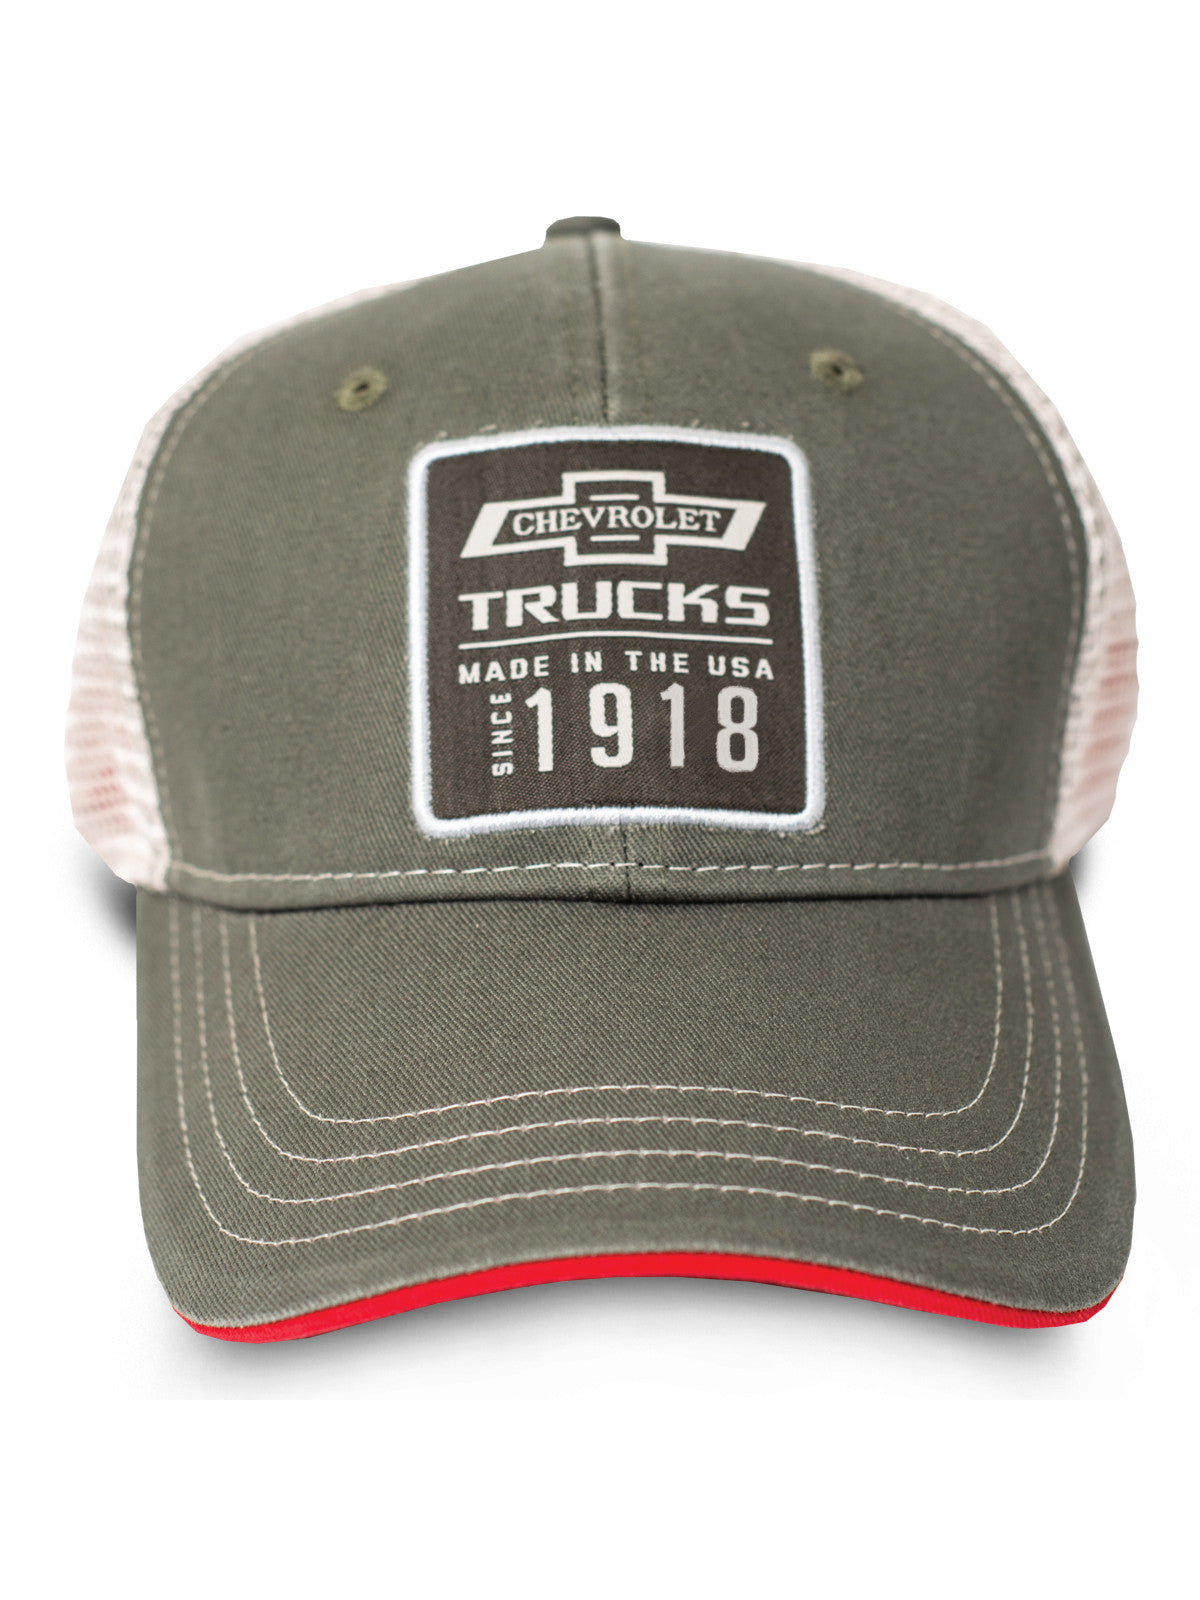 Buck Wear 9131 Chevy Shop Logo Cap in Olive Front View